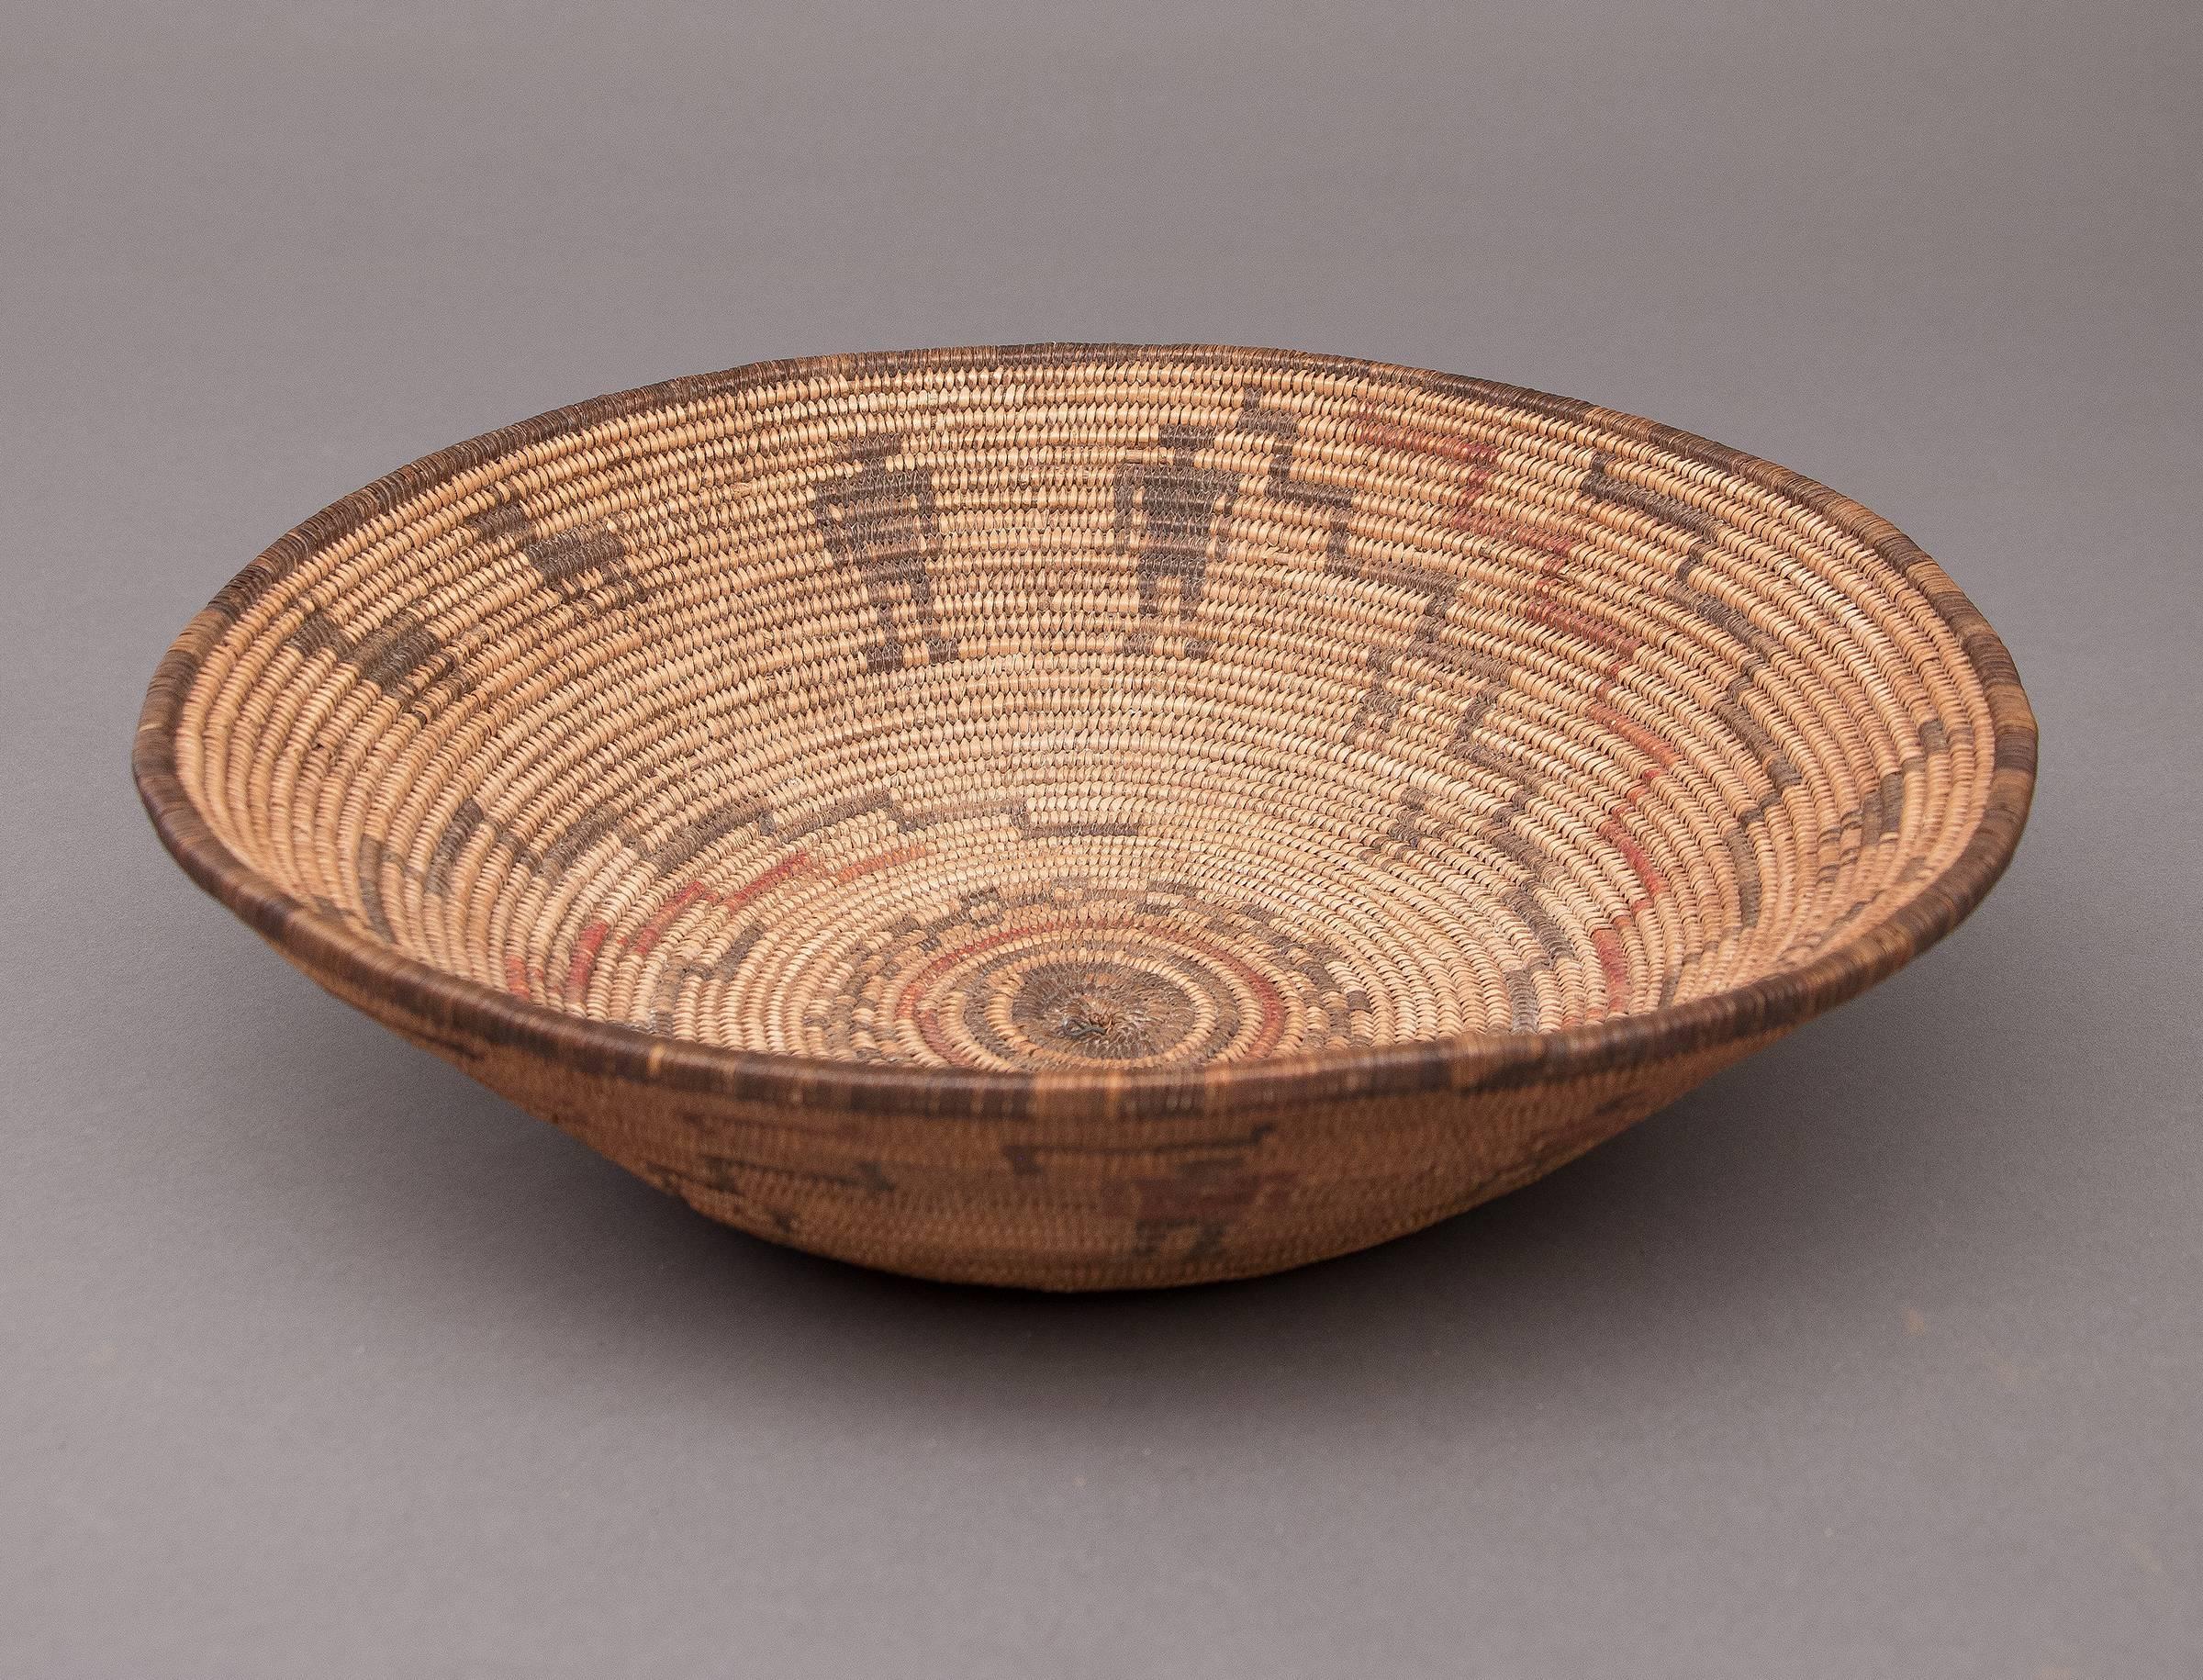 A native American basket in a bowl/tray form woven by an Apache, circa 1890. The polychrome design includes human figures, and horses/dogs.

As with all our offerings, authenticity is fully guaranteed.

Expedited and International Shipping is